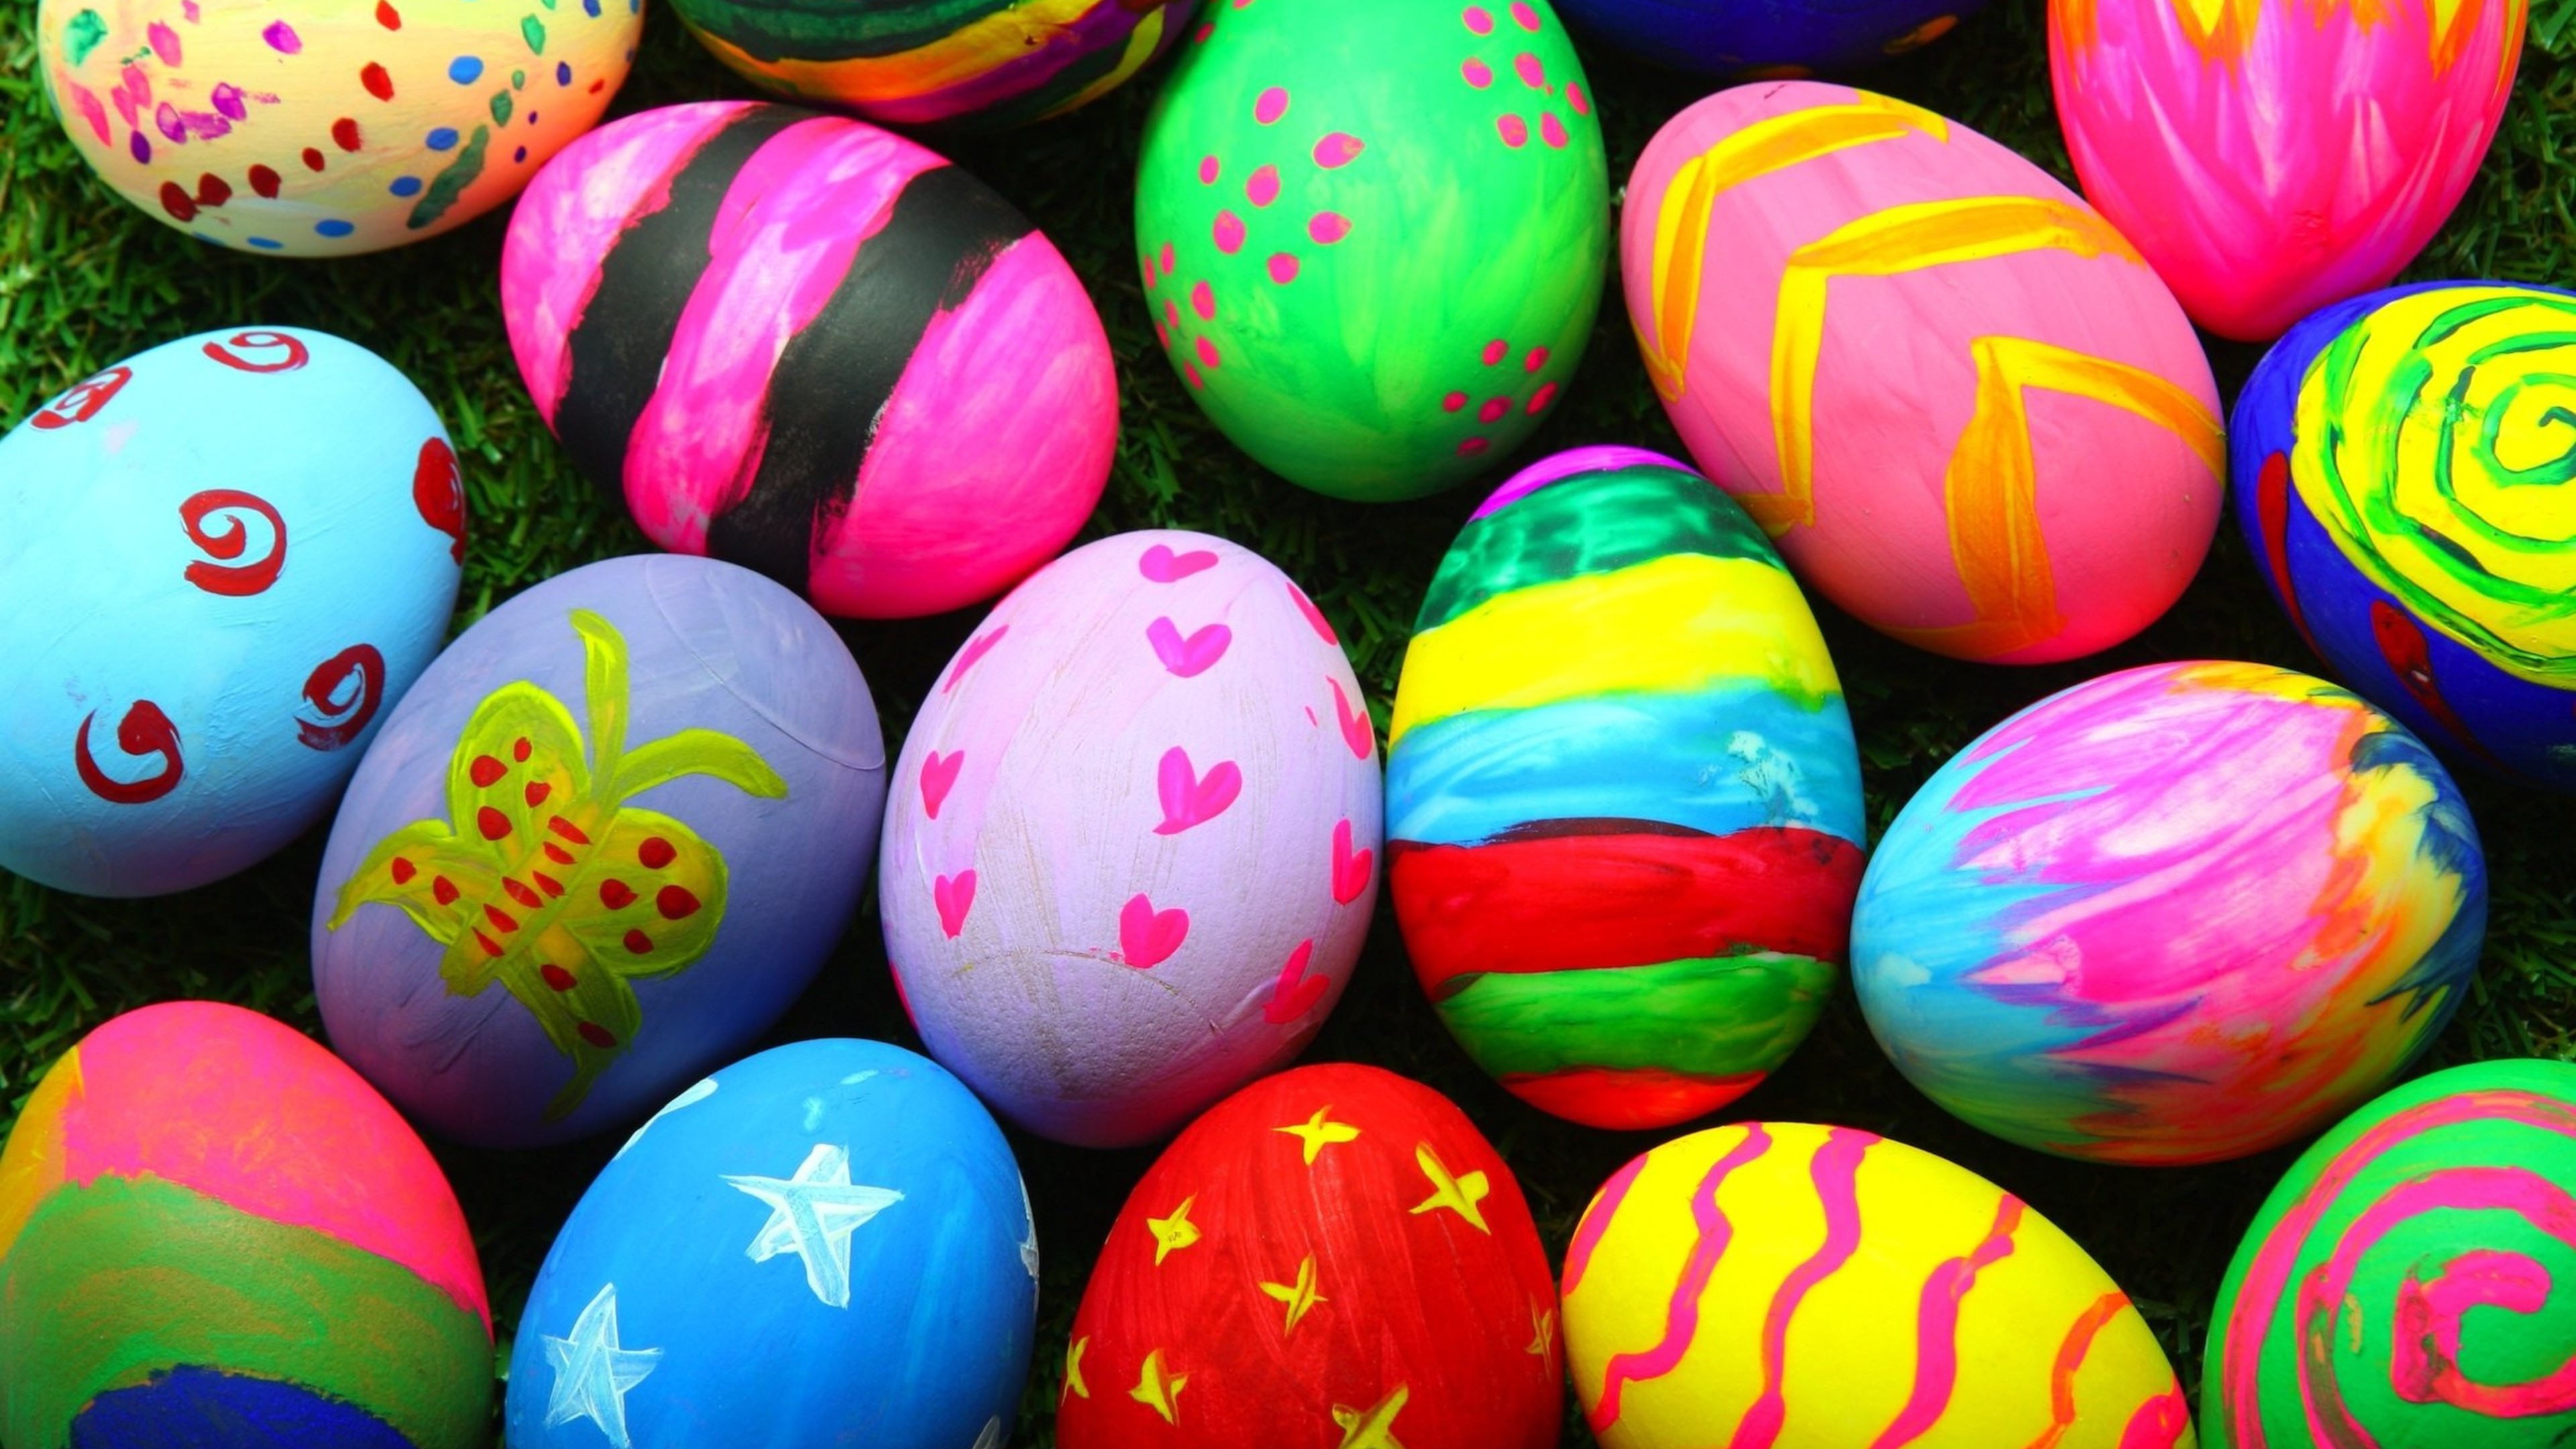 Colorful Easter Eggs, HD Celebrations, 4k Wallpapers, Images